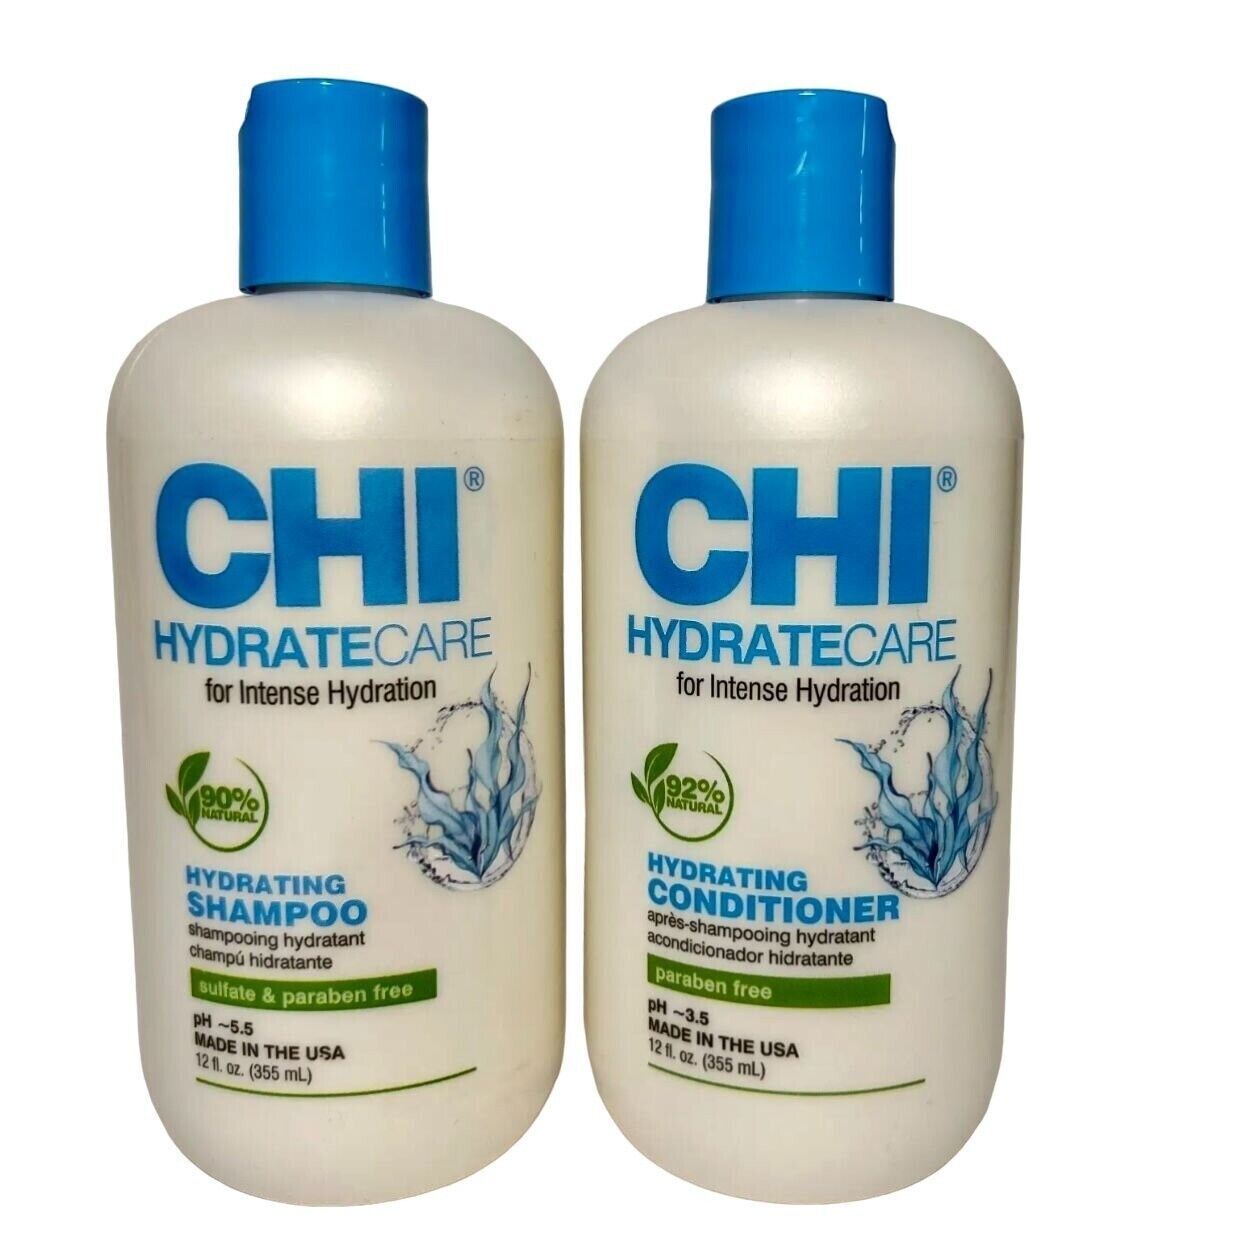 CHI HydrateCare Hydrating Shampoo and Conditioner Set Total Repair 12oz 355mL - $26.00